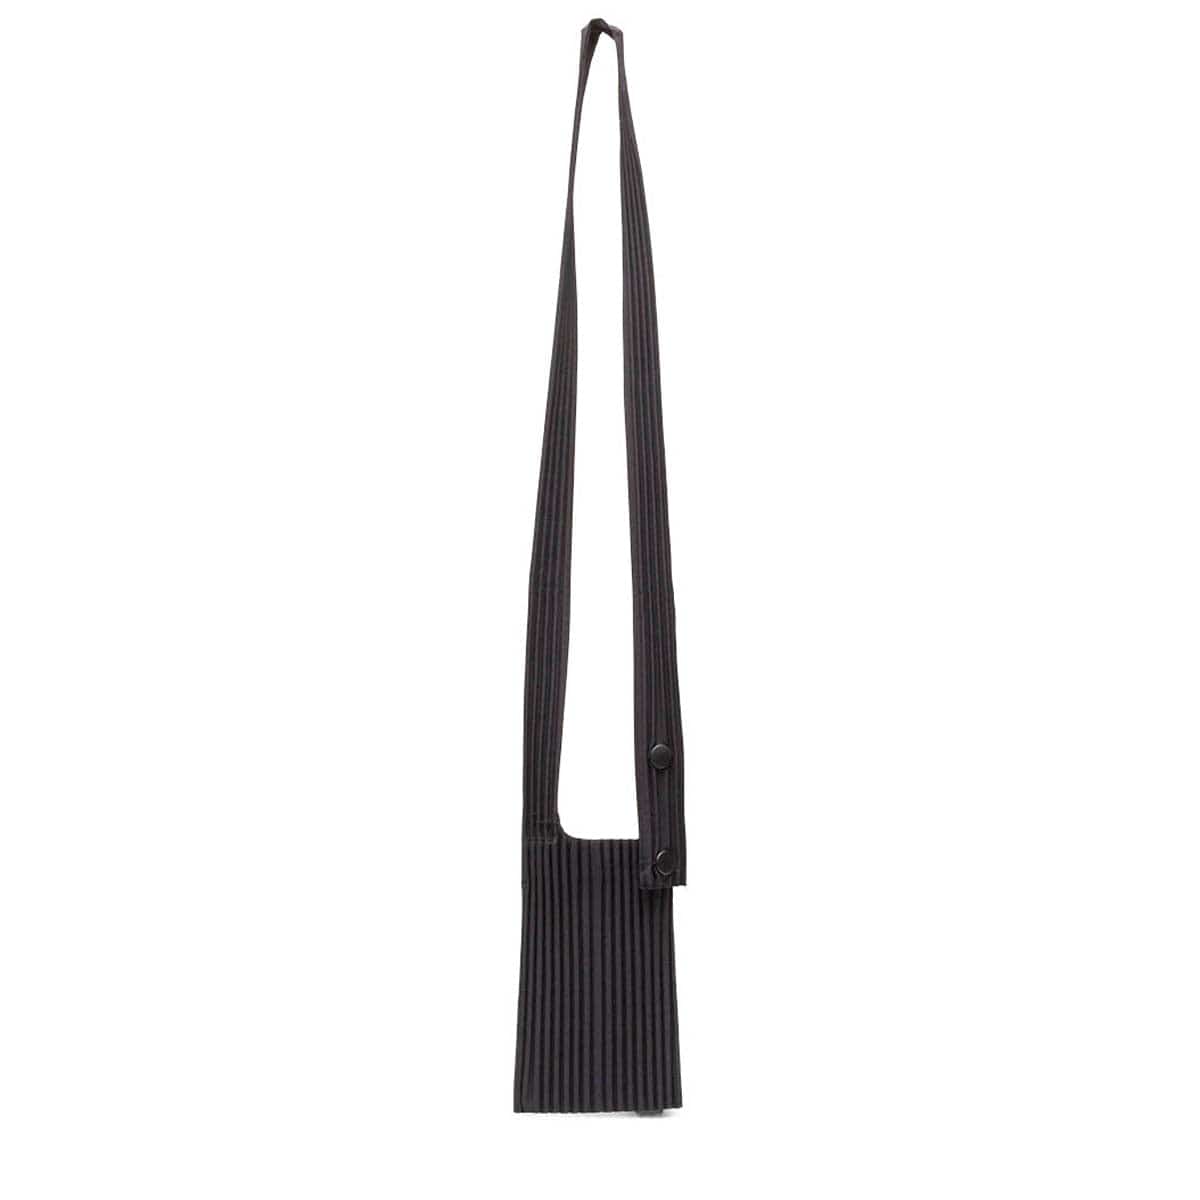 Pleats Please Issey Miyake Pleated Curved Tote Bag - Farfetch